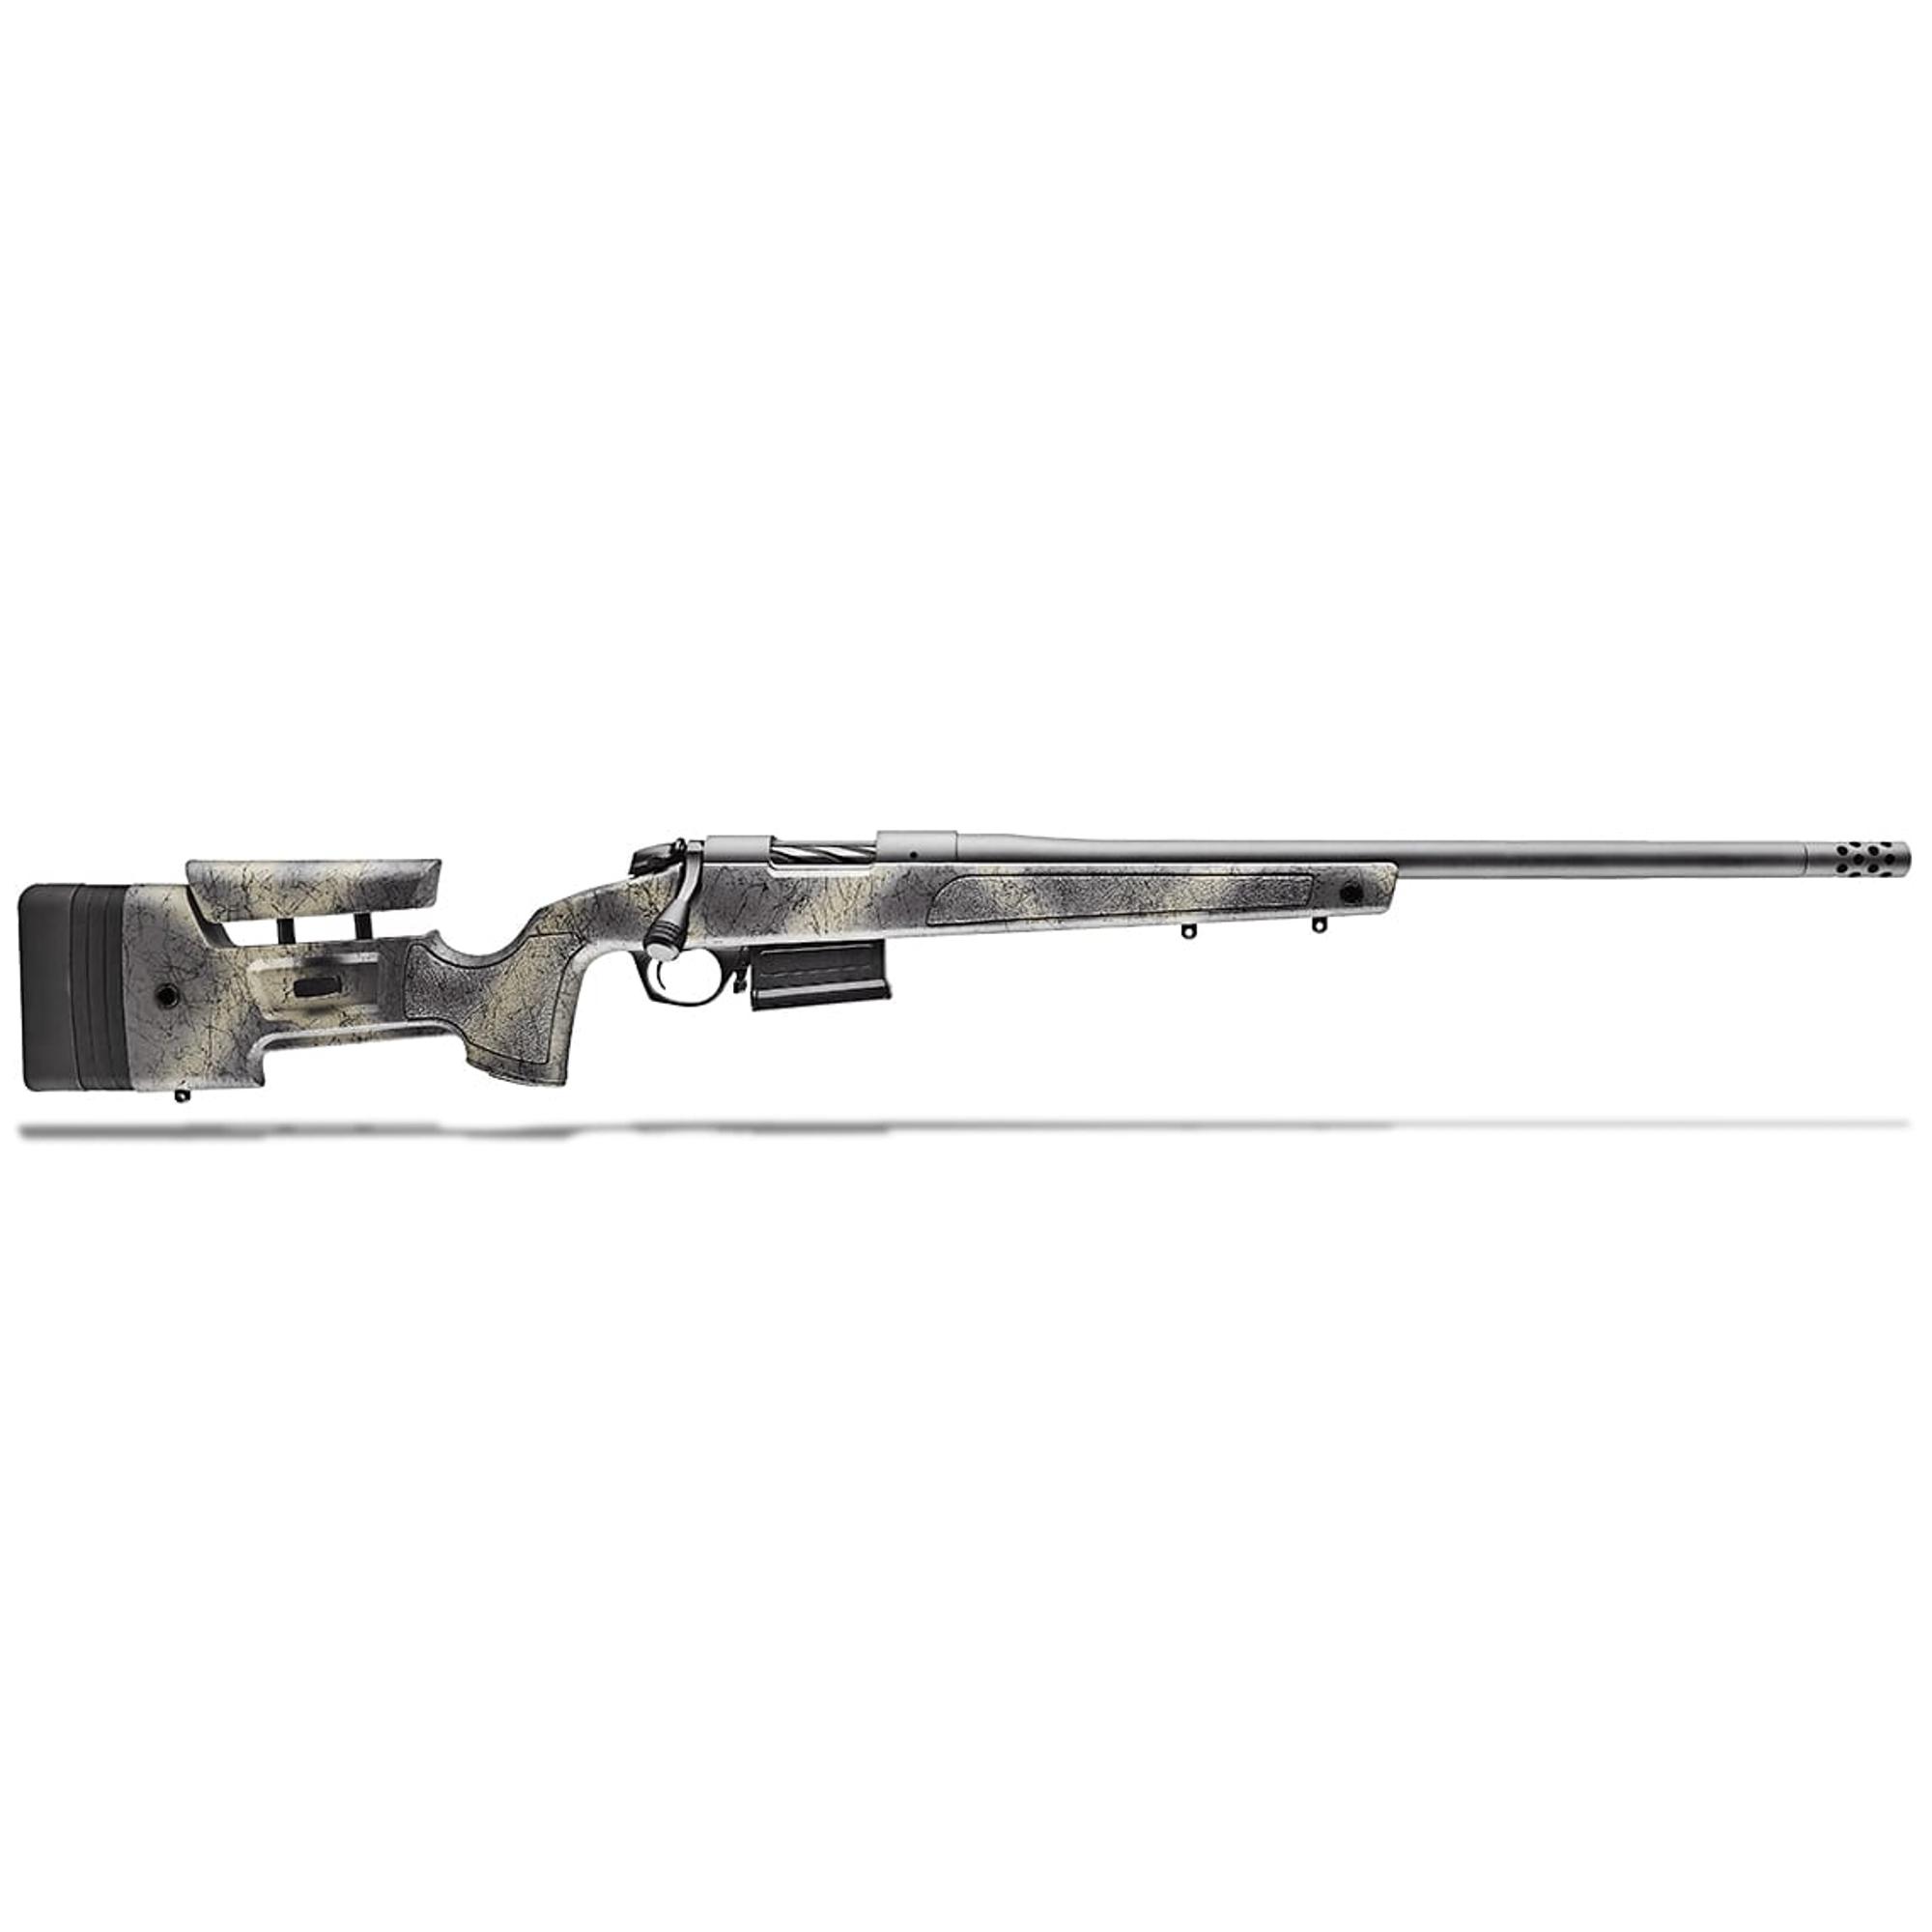 B- 14 Hmr Wilderness .308 Win Molded Mini- Chassis Stock 20 